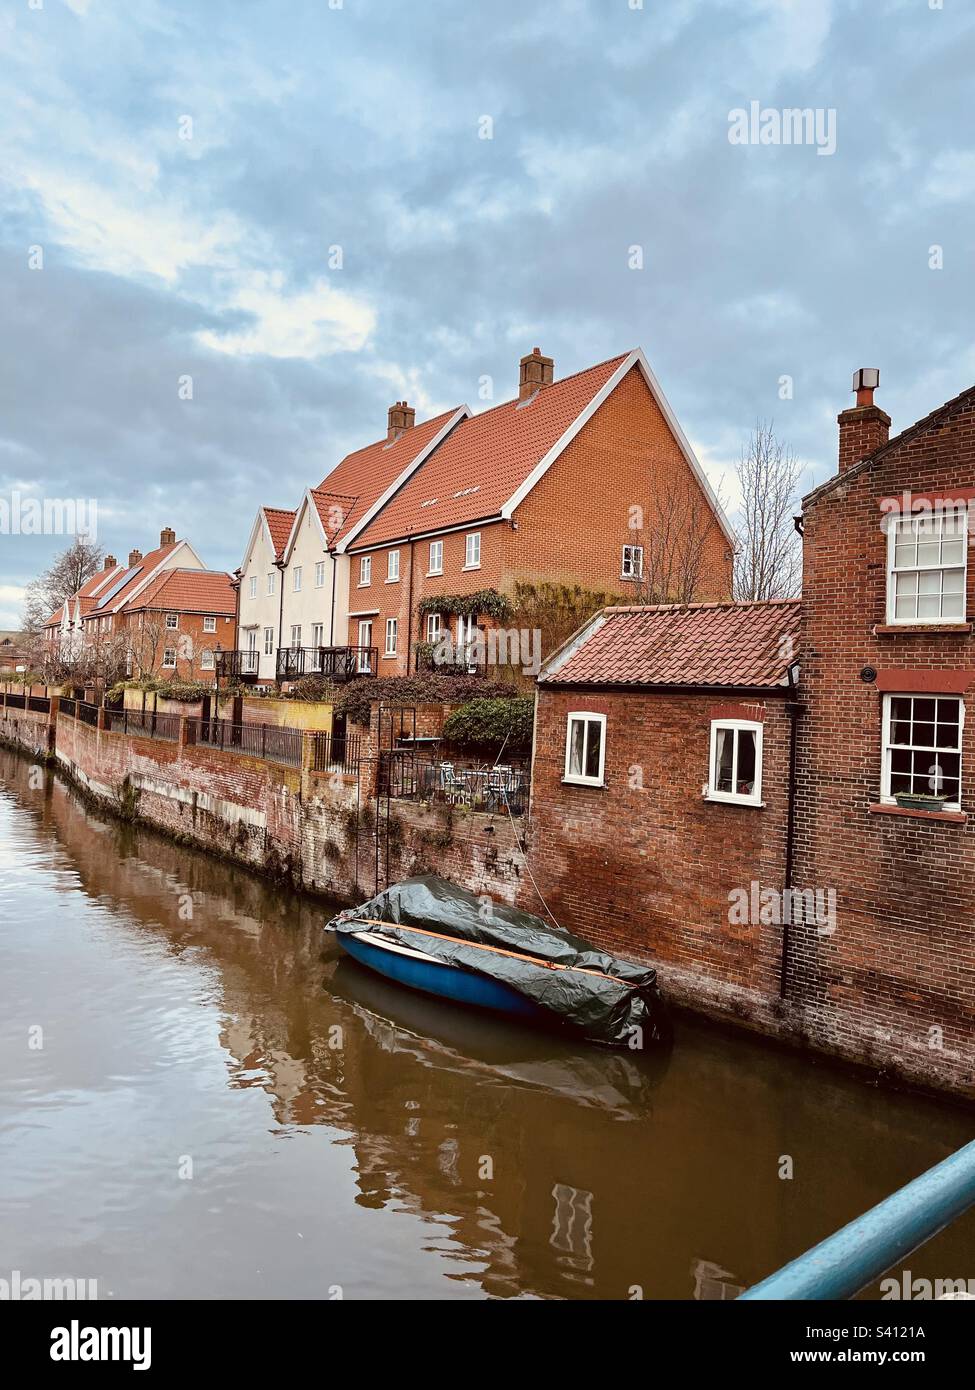 River Wensum, Norwich, Angleterre, Royaume-Uni. Banque D'Images